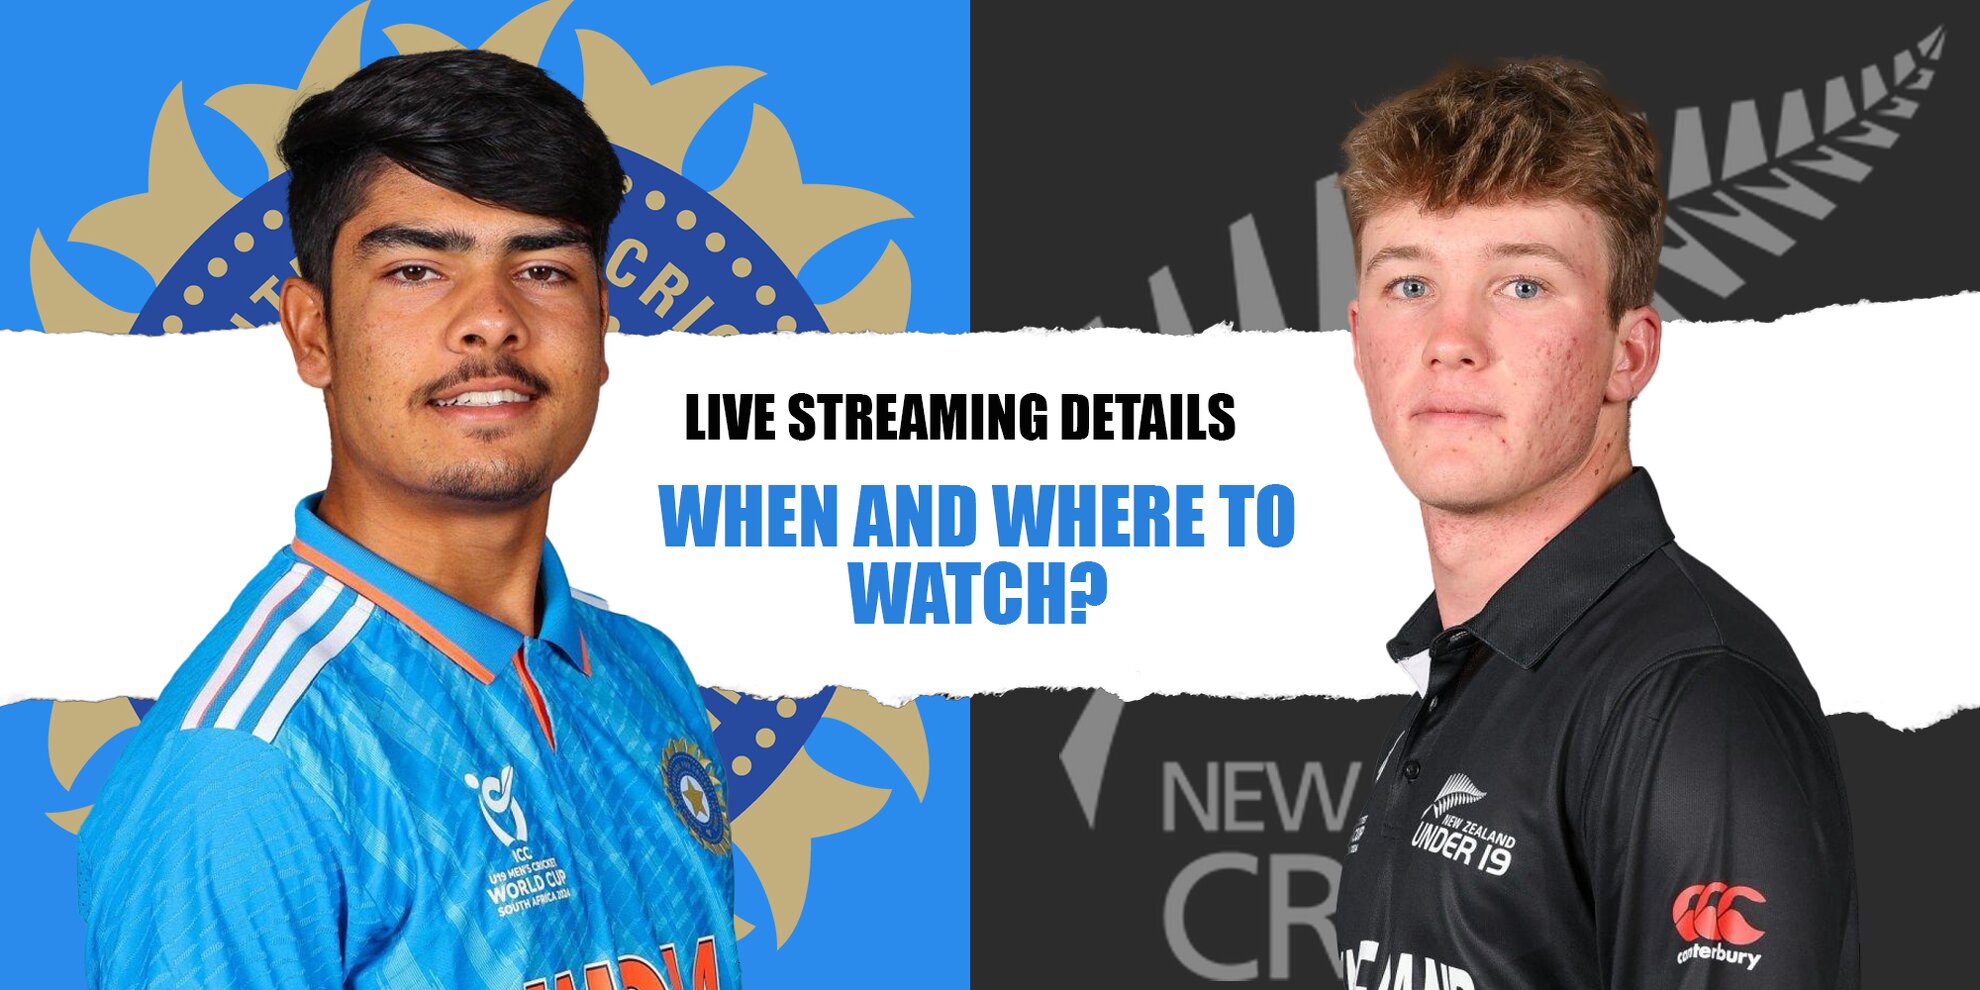 IND U19 vs NZ U19 Live streaming details, when and where to watch